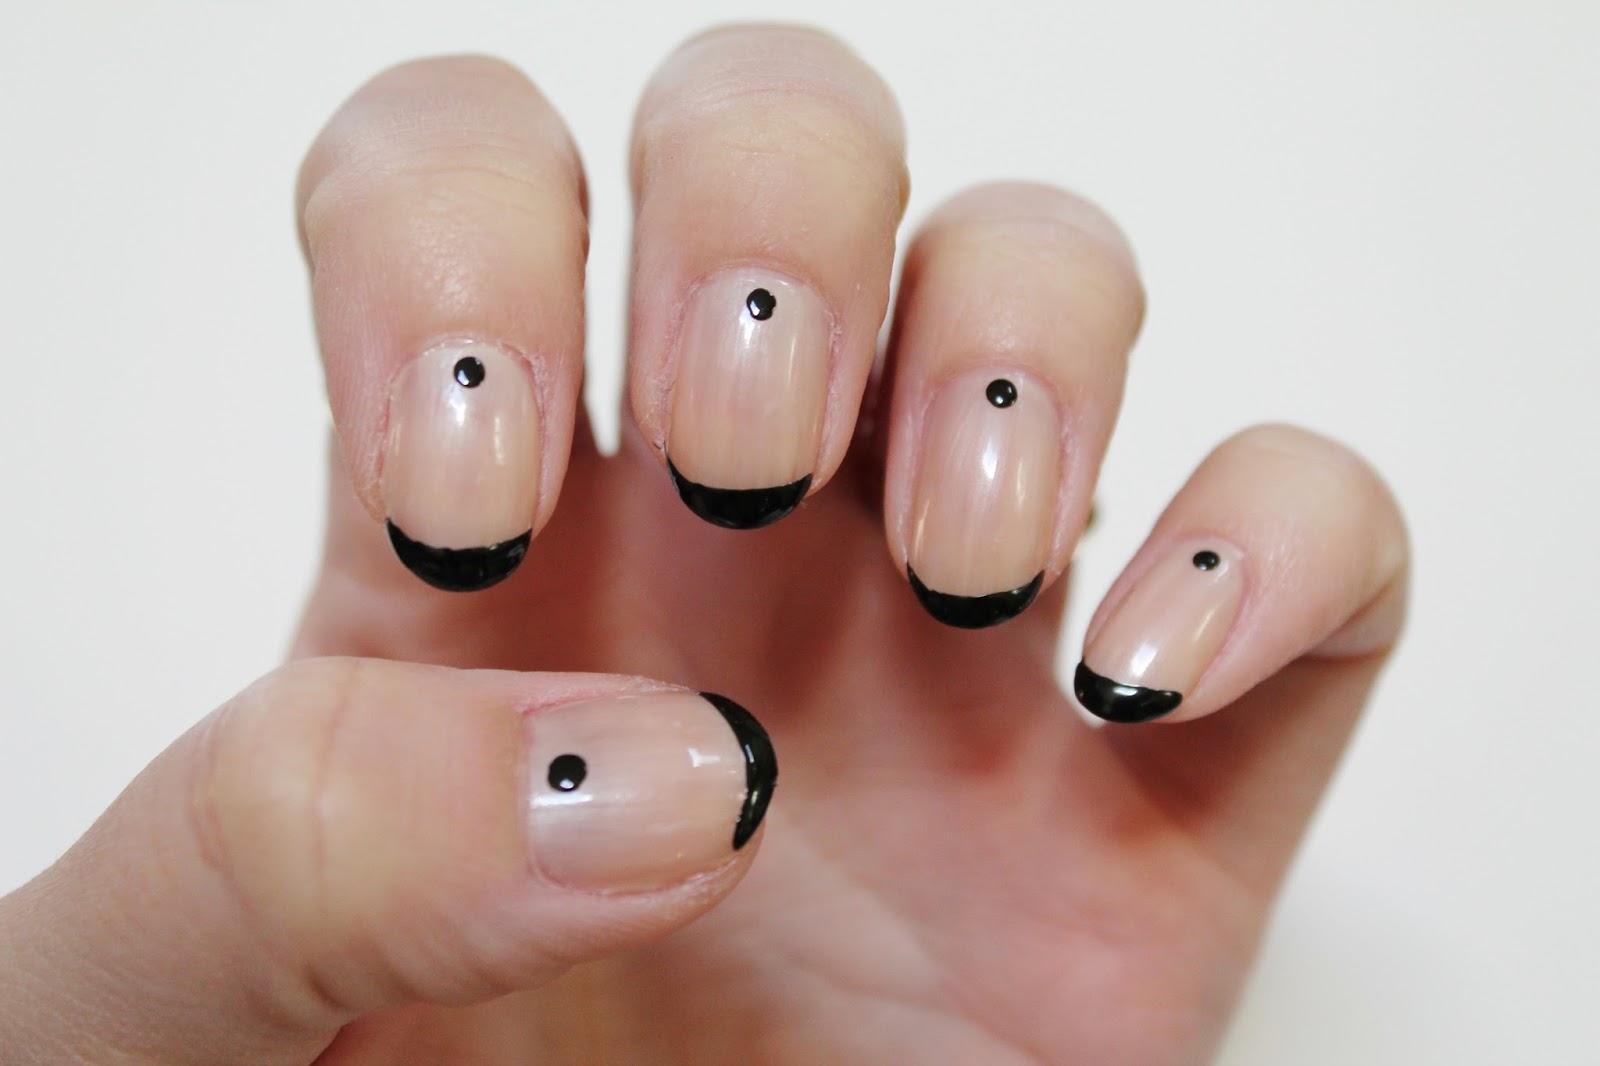 Simple and Minimalist White Nail Art Designs - wide 9